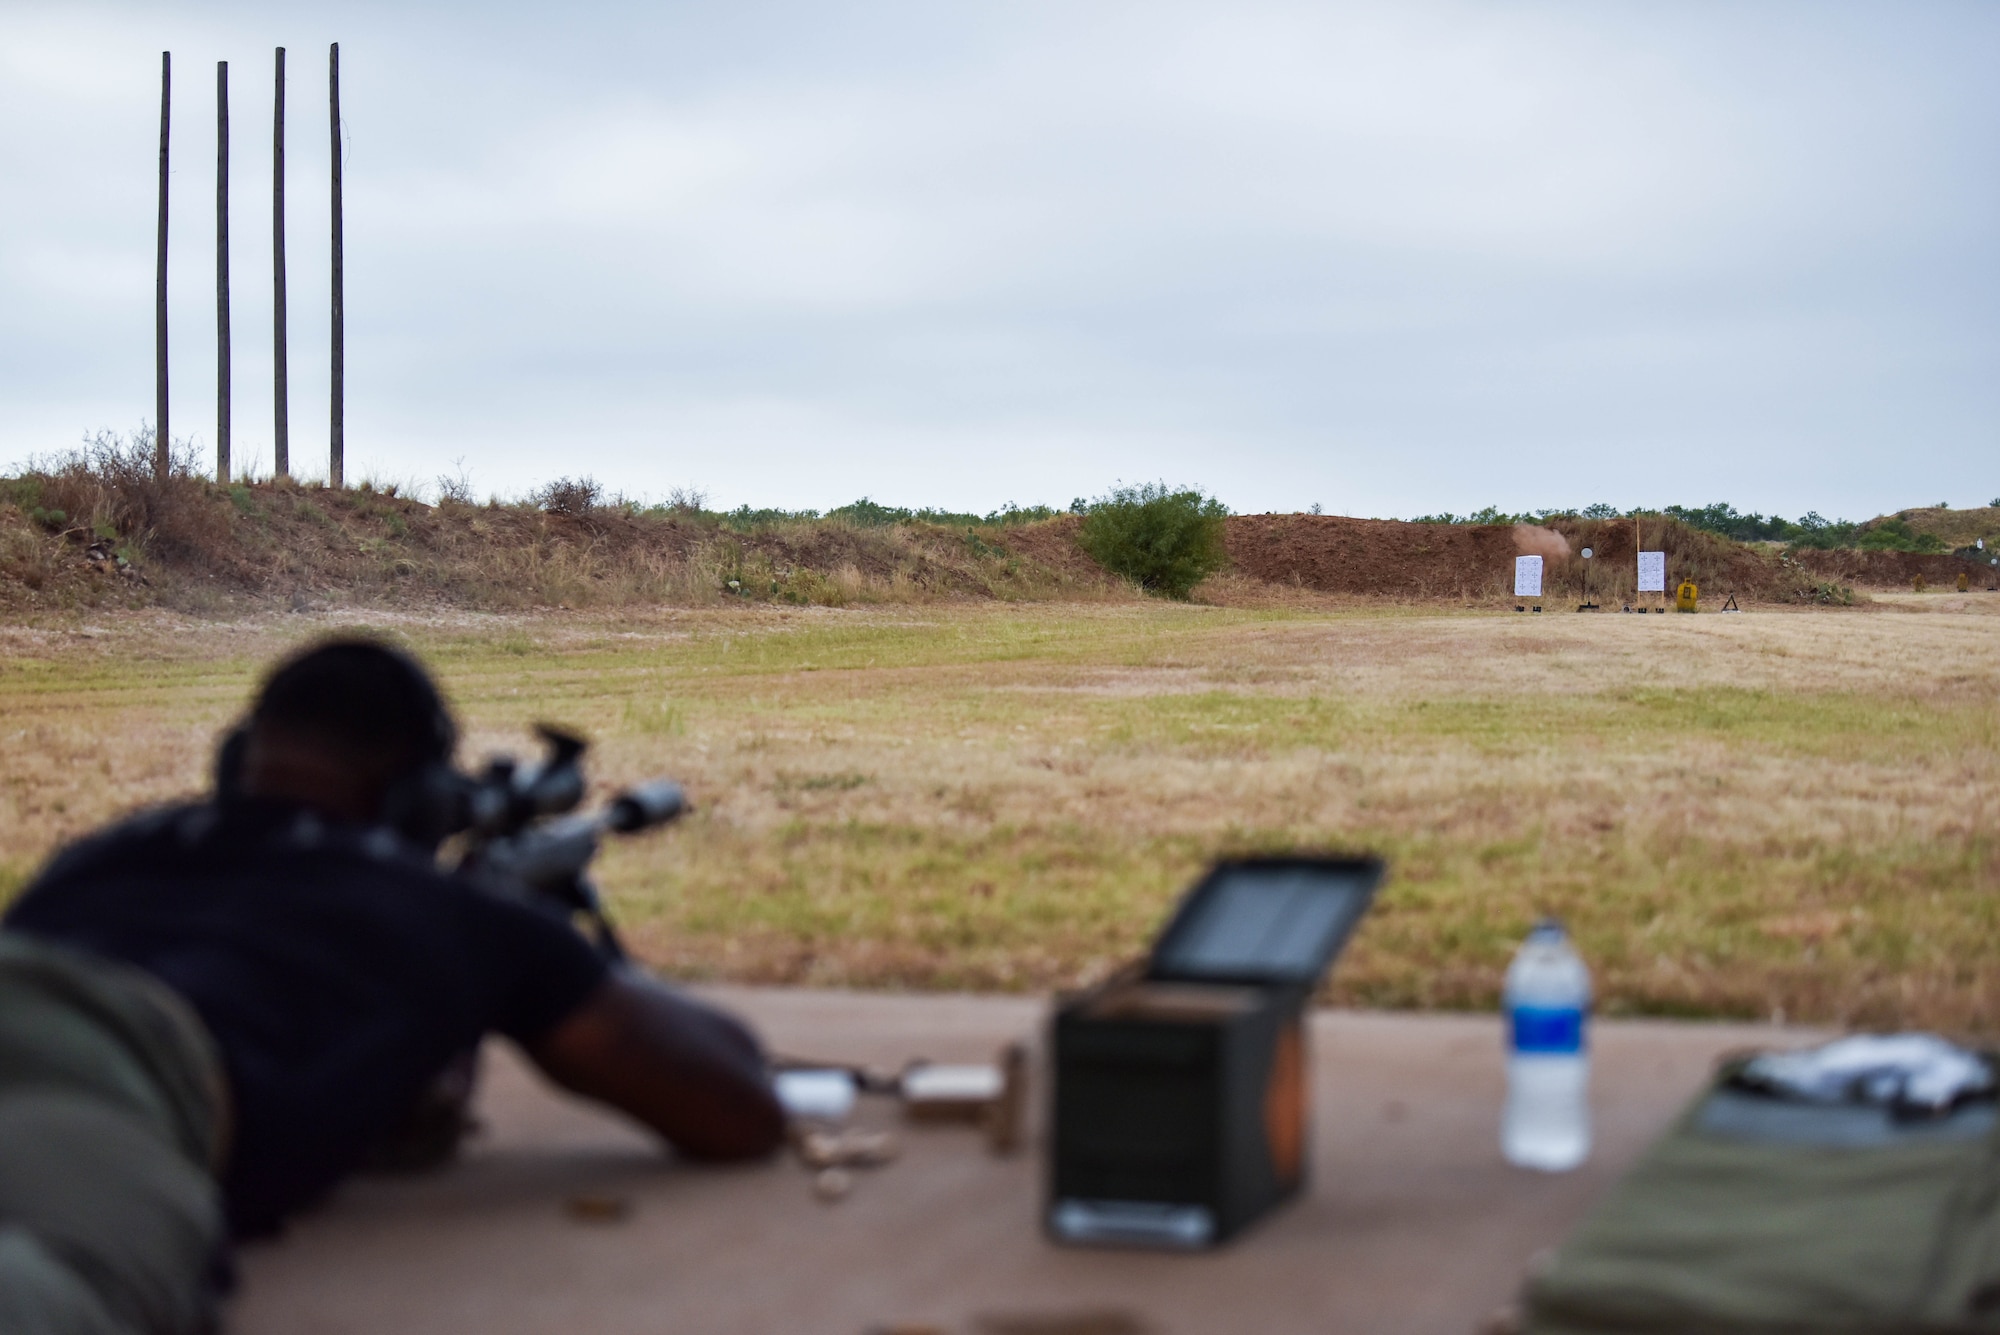 U.S. Air Force Staff Sgt. Christopher Little, 17th Security Forces Squadron flight chief, fires at a target during the joint marksmanship training course at the San Angelo Police Department firing range in San Angelo, Texas, Sept. 29, 2021. Members shot at targets from various distances while performing corrections on first-round impacts to help them improve their accuracy. (U.S. Air Force photo by Senior Airman Jermaine Ayers)